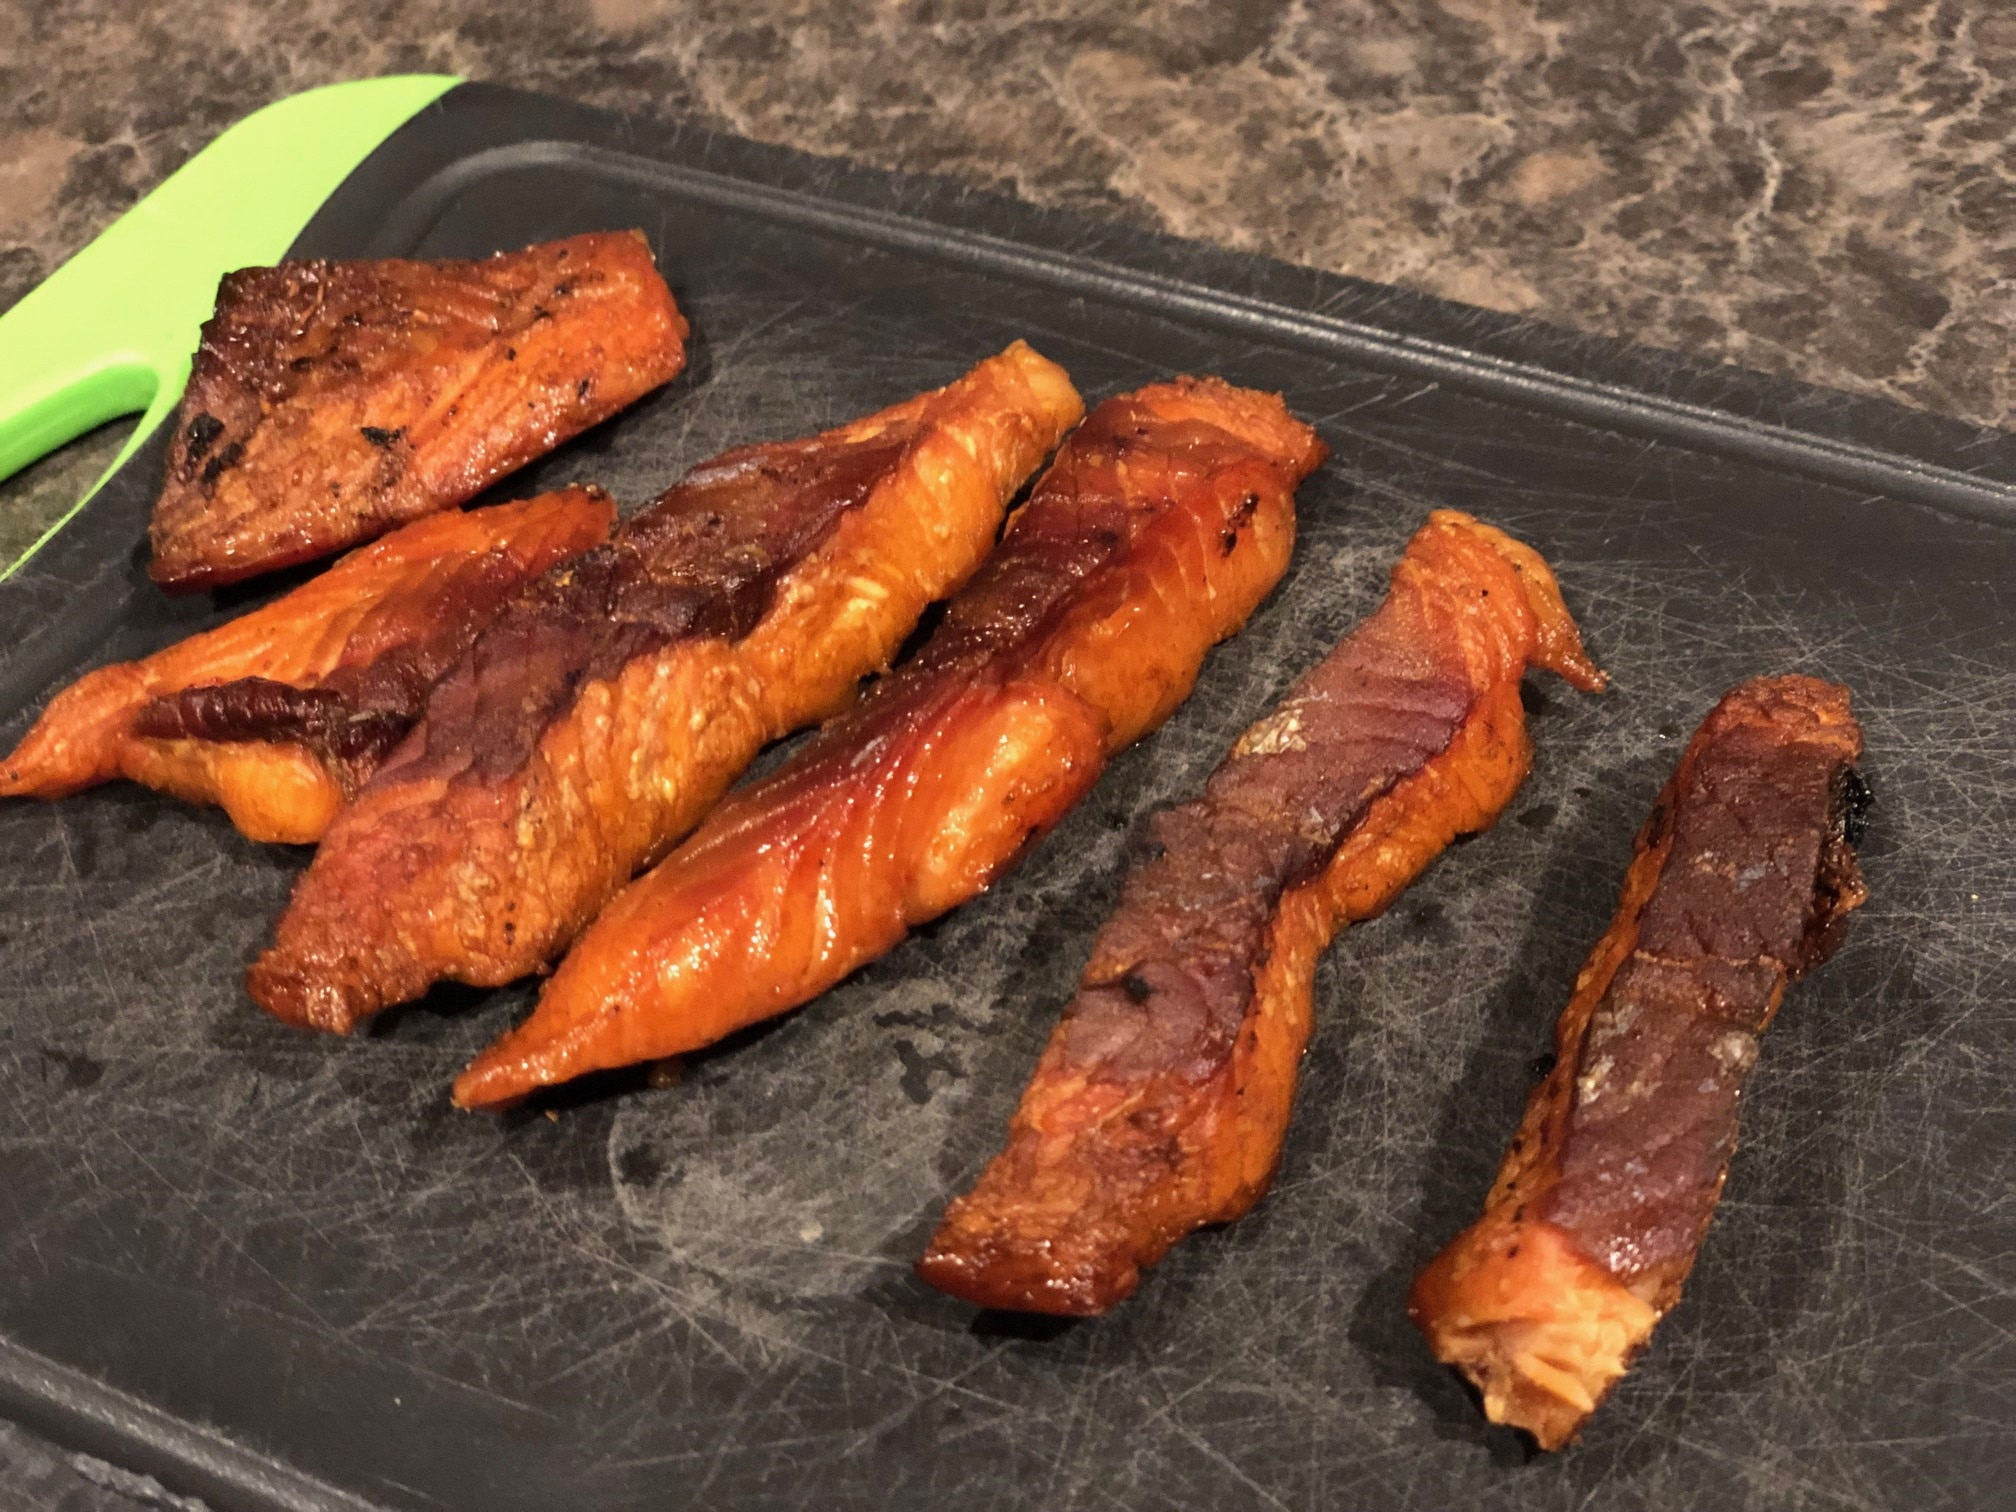 Smoked Salmon Uses Best Of Traeger Recipes for Smoked Salmon Traeger Salmon with